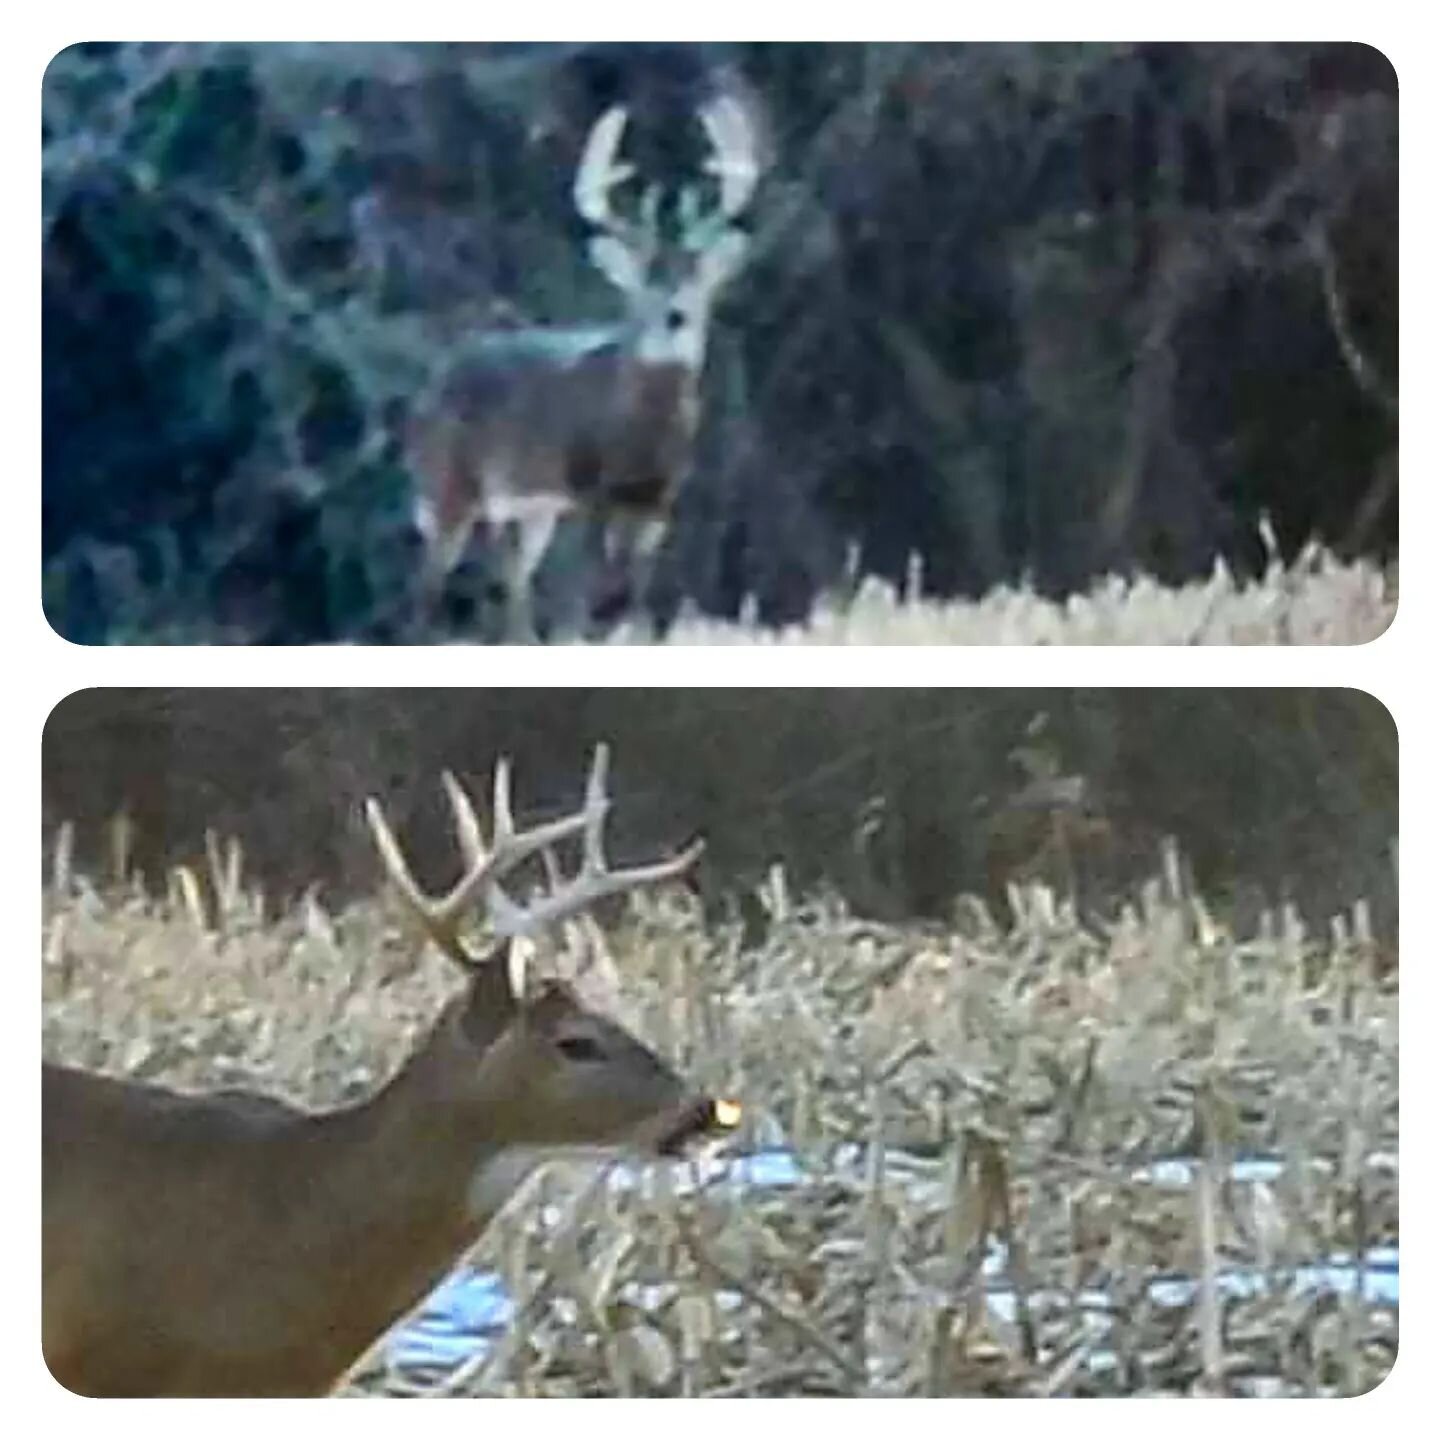 HuntChef Experience Hunt Happening Now at Bluegrass Whitetail Outfitters in Illinois!! Seen this three year old in the top photo and the two year old yesterday.  Bucks are moving and only a matter of time til we get one.  Hoping their grand daddy's c